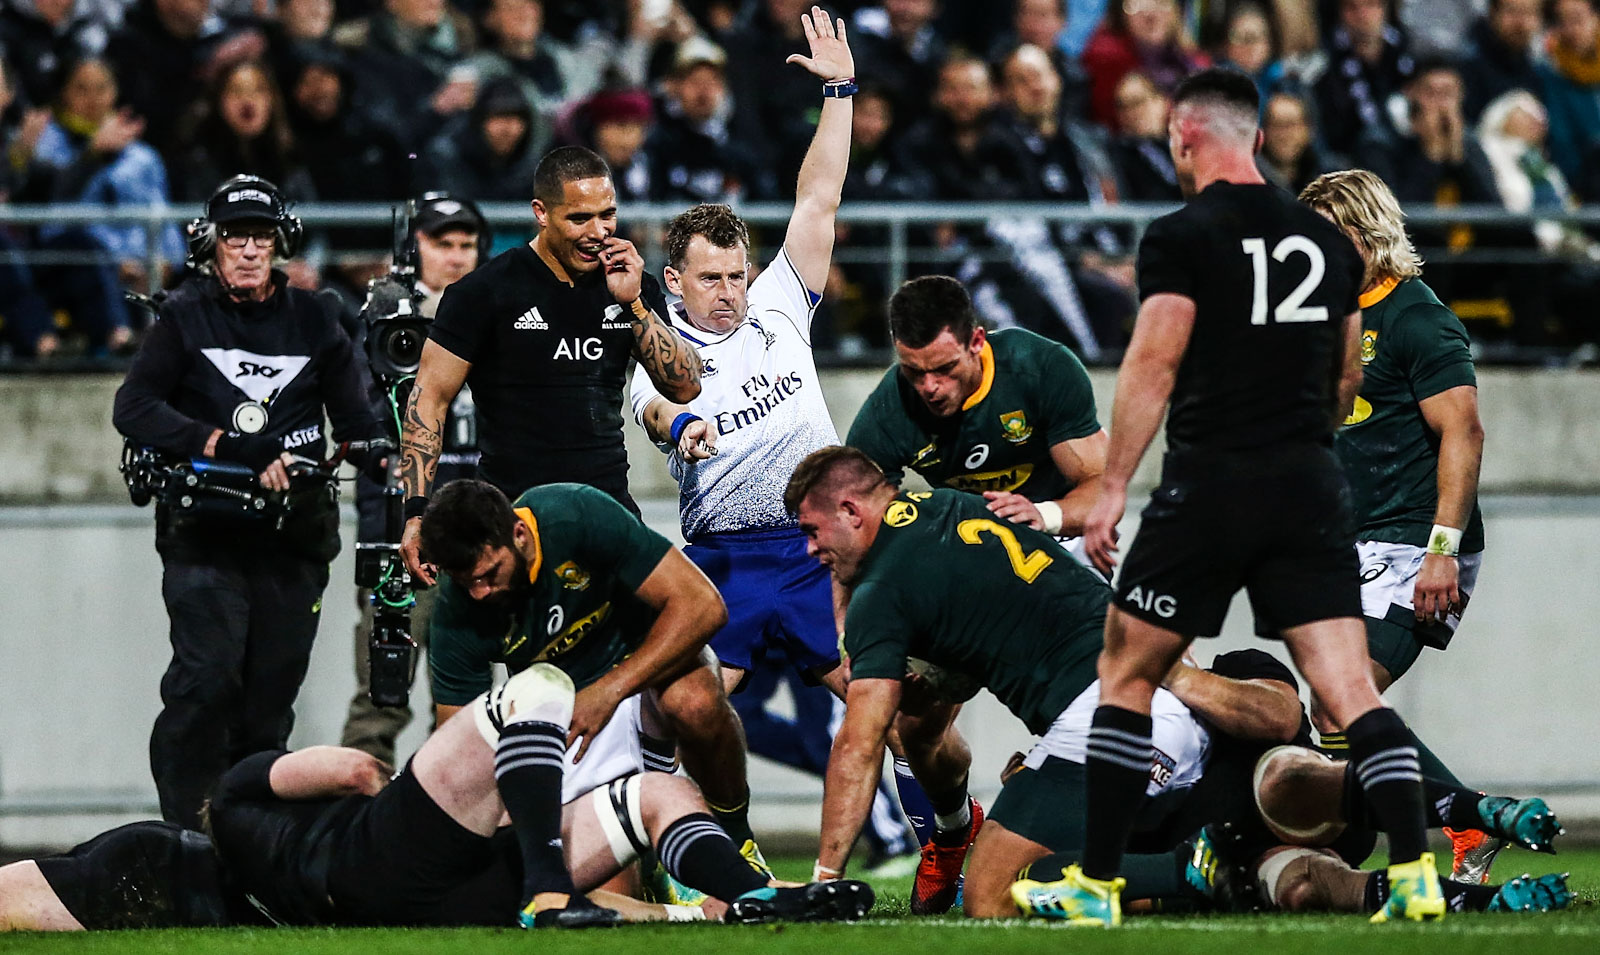 Nigel Owens awards a try to the Springboks during their 36-34 win over New Zealand in Wellington in 2018.